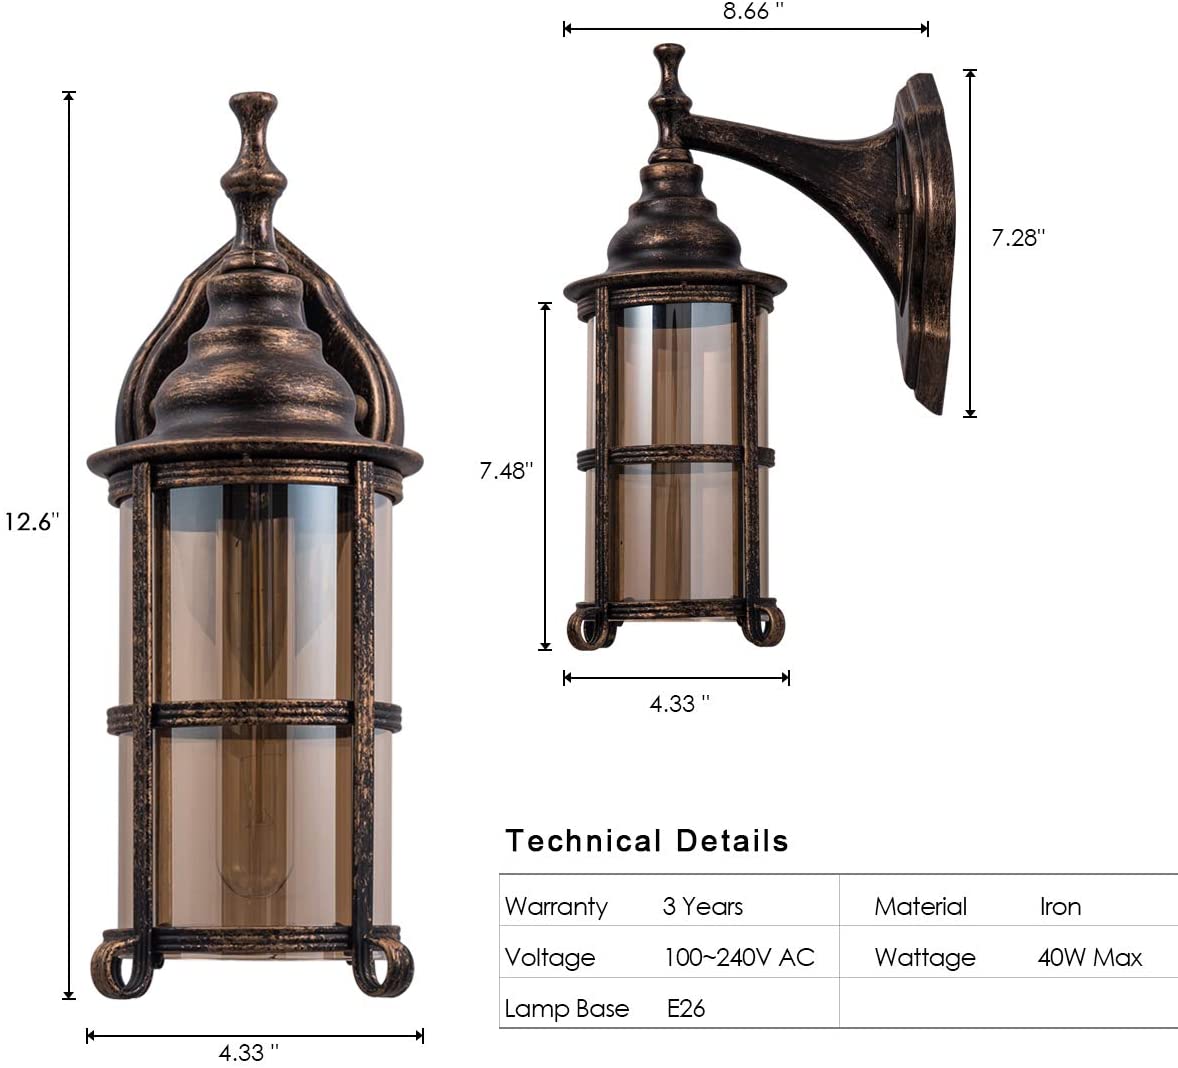 Rustic waterproof outdoor wall sconce industrial glass lantern with rubbed bronze finish